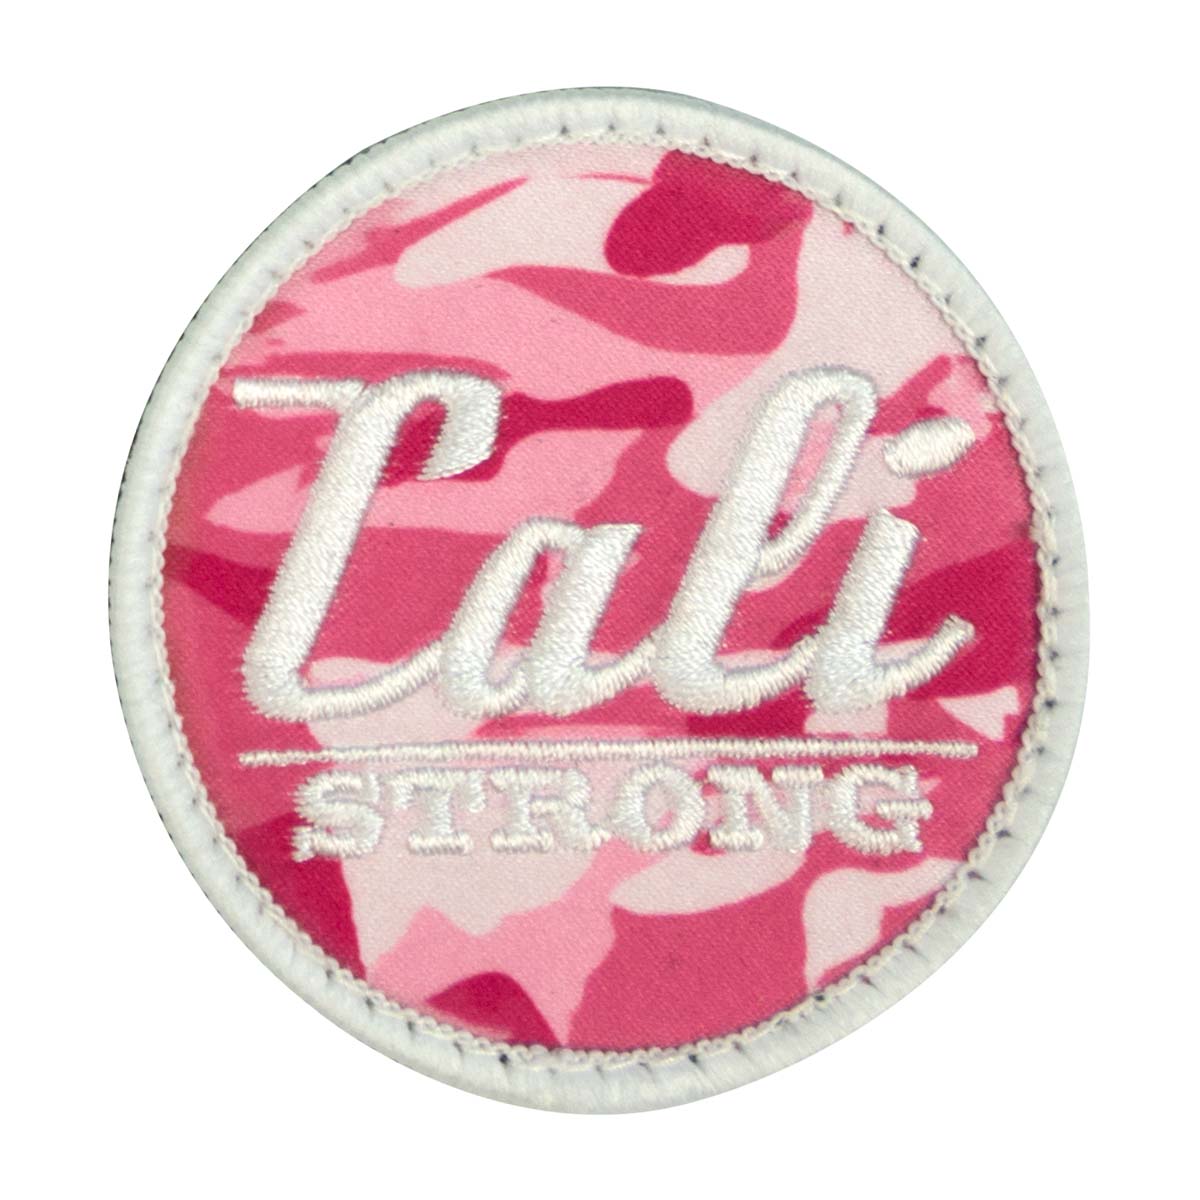 CALI Strong Urban Camo Pink Round Embroidered Hook-and-Loop Morale Patch - Patches - Image 1 - CALI Strong